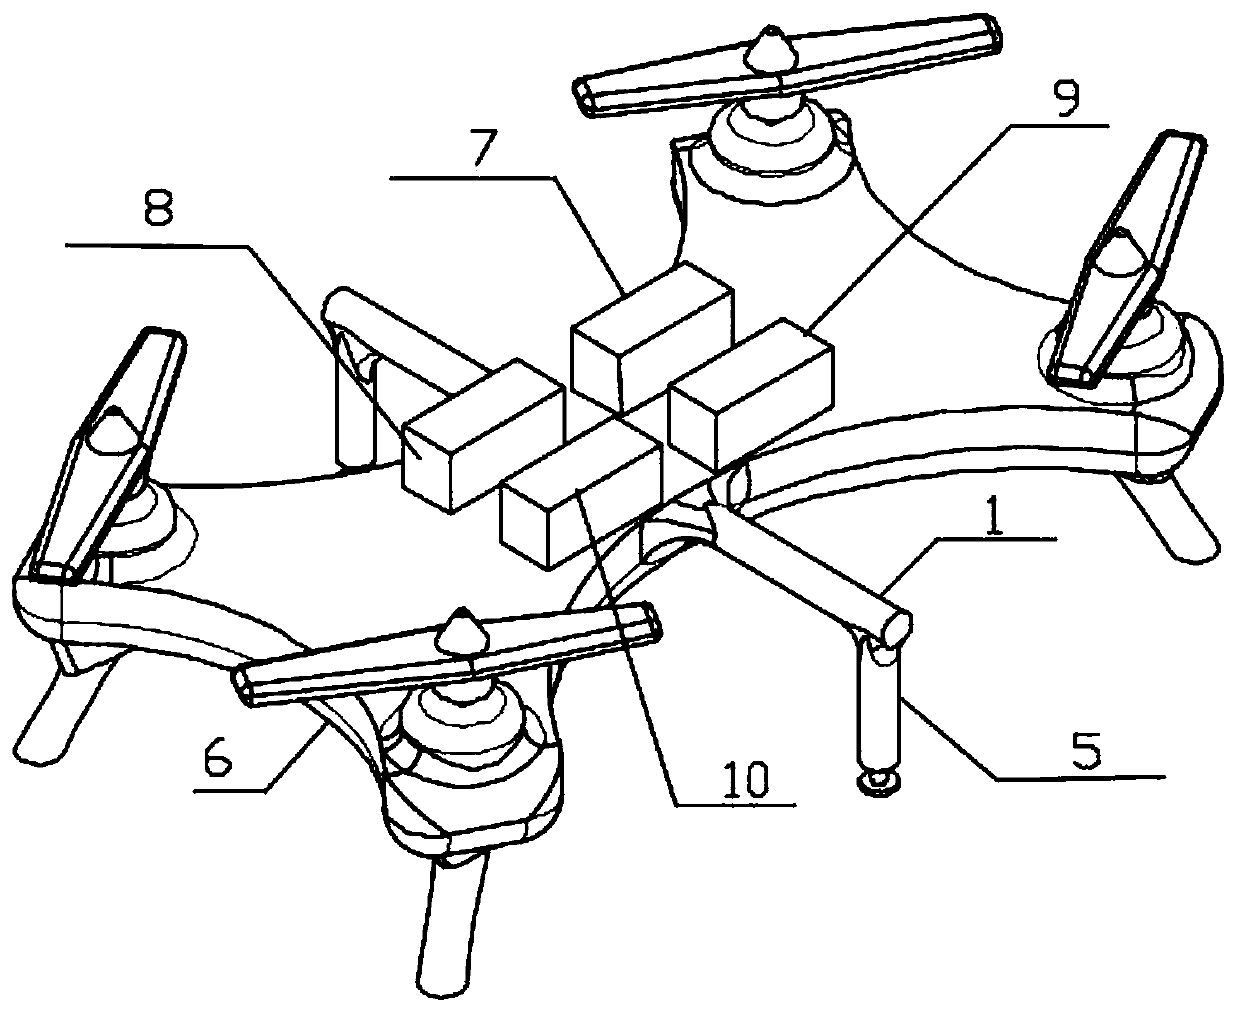 Intelligent pruning system and method based on drone